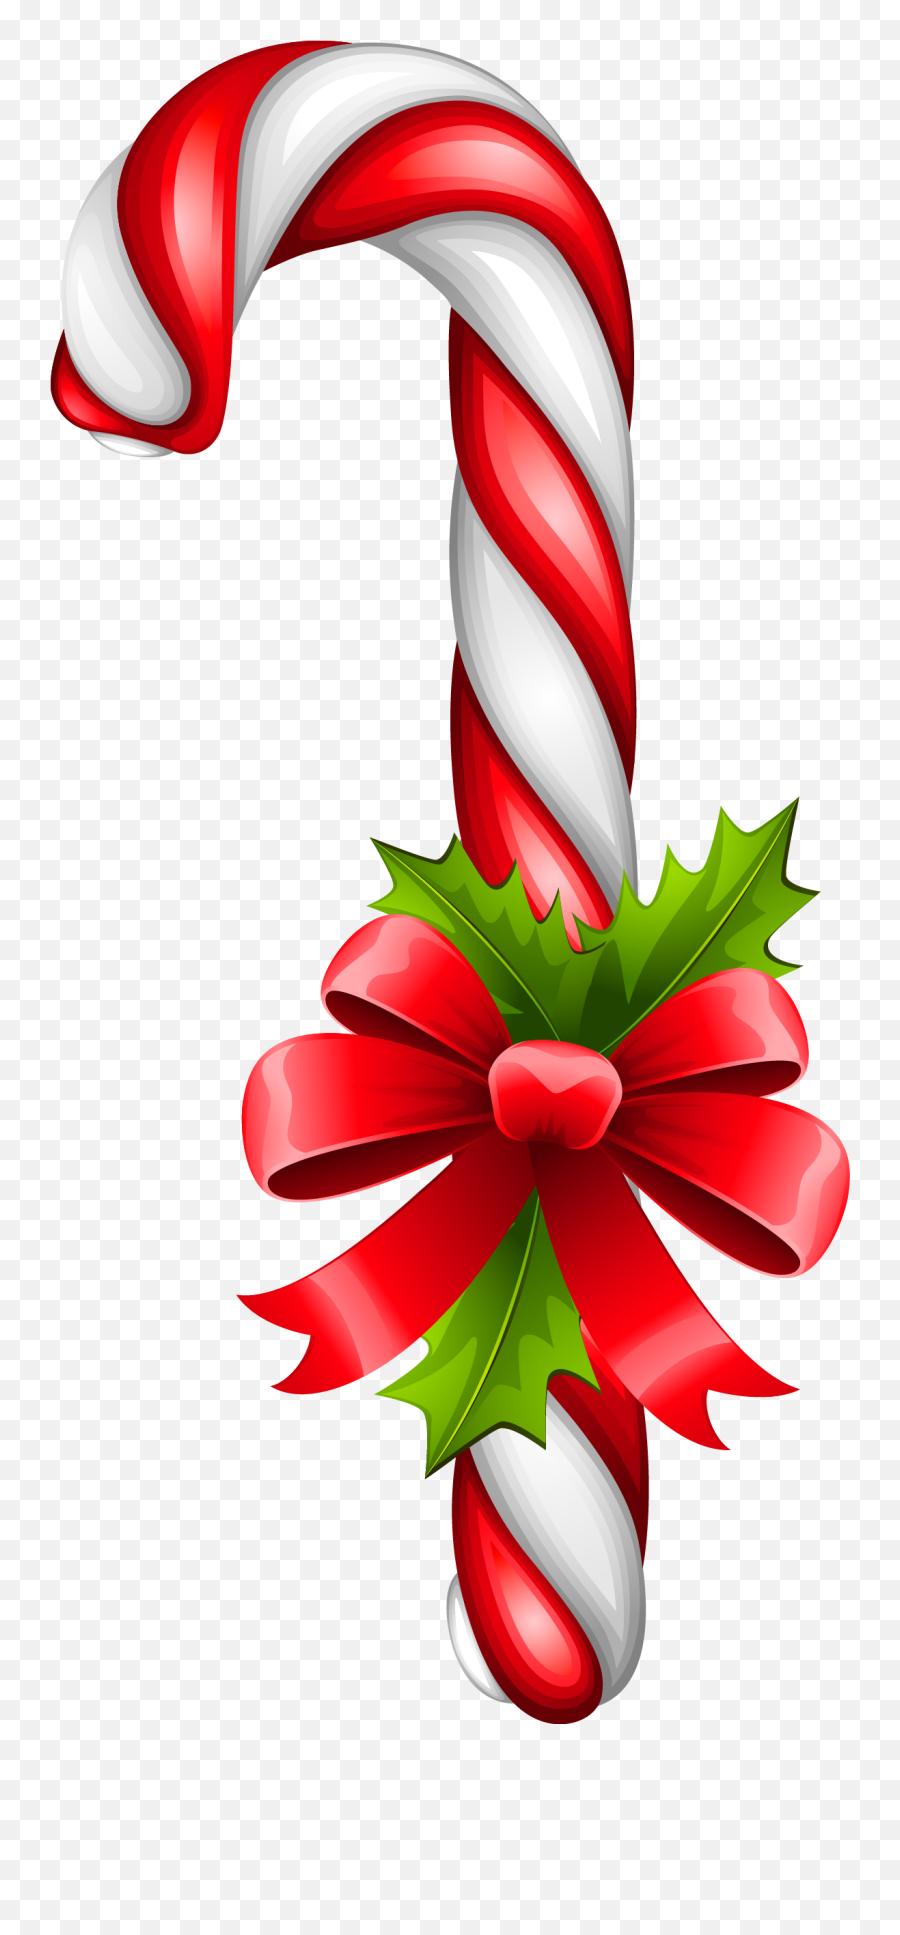 120395 Transparent Free Clipart - Christmas Candy Cane Transparent Emoji,Candy Cane Emoji Copy And Paste